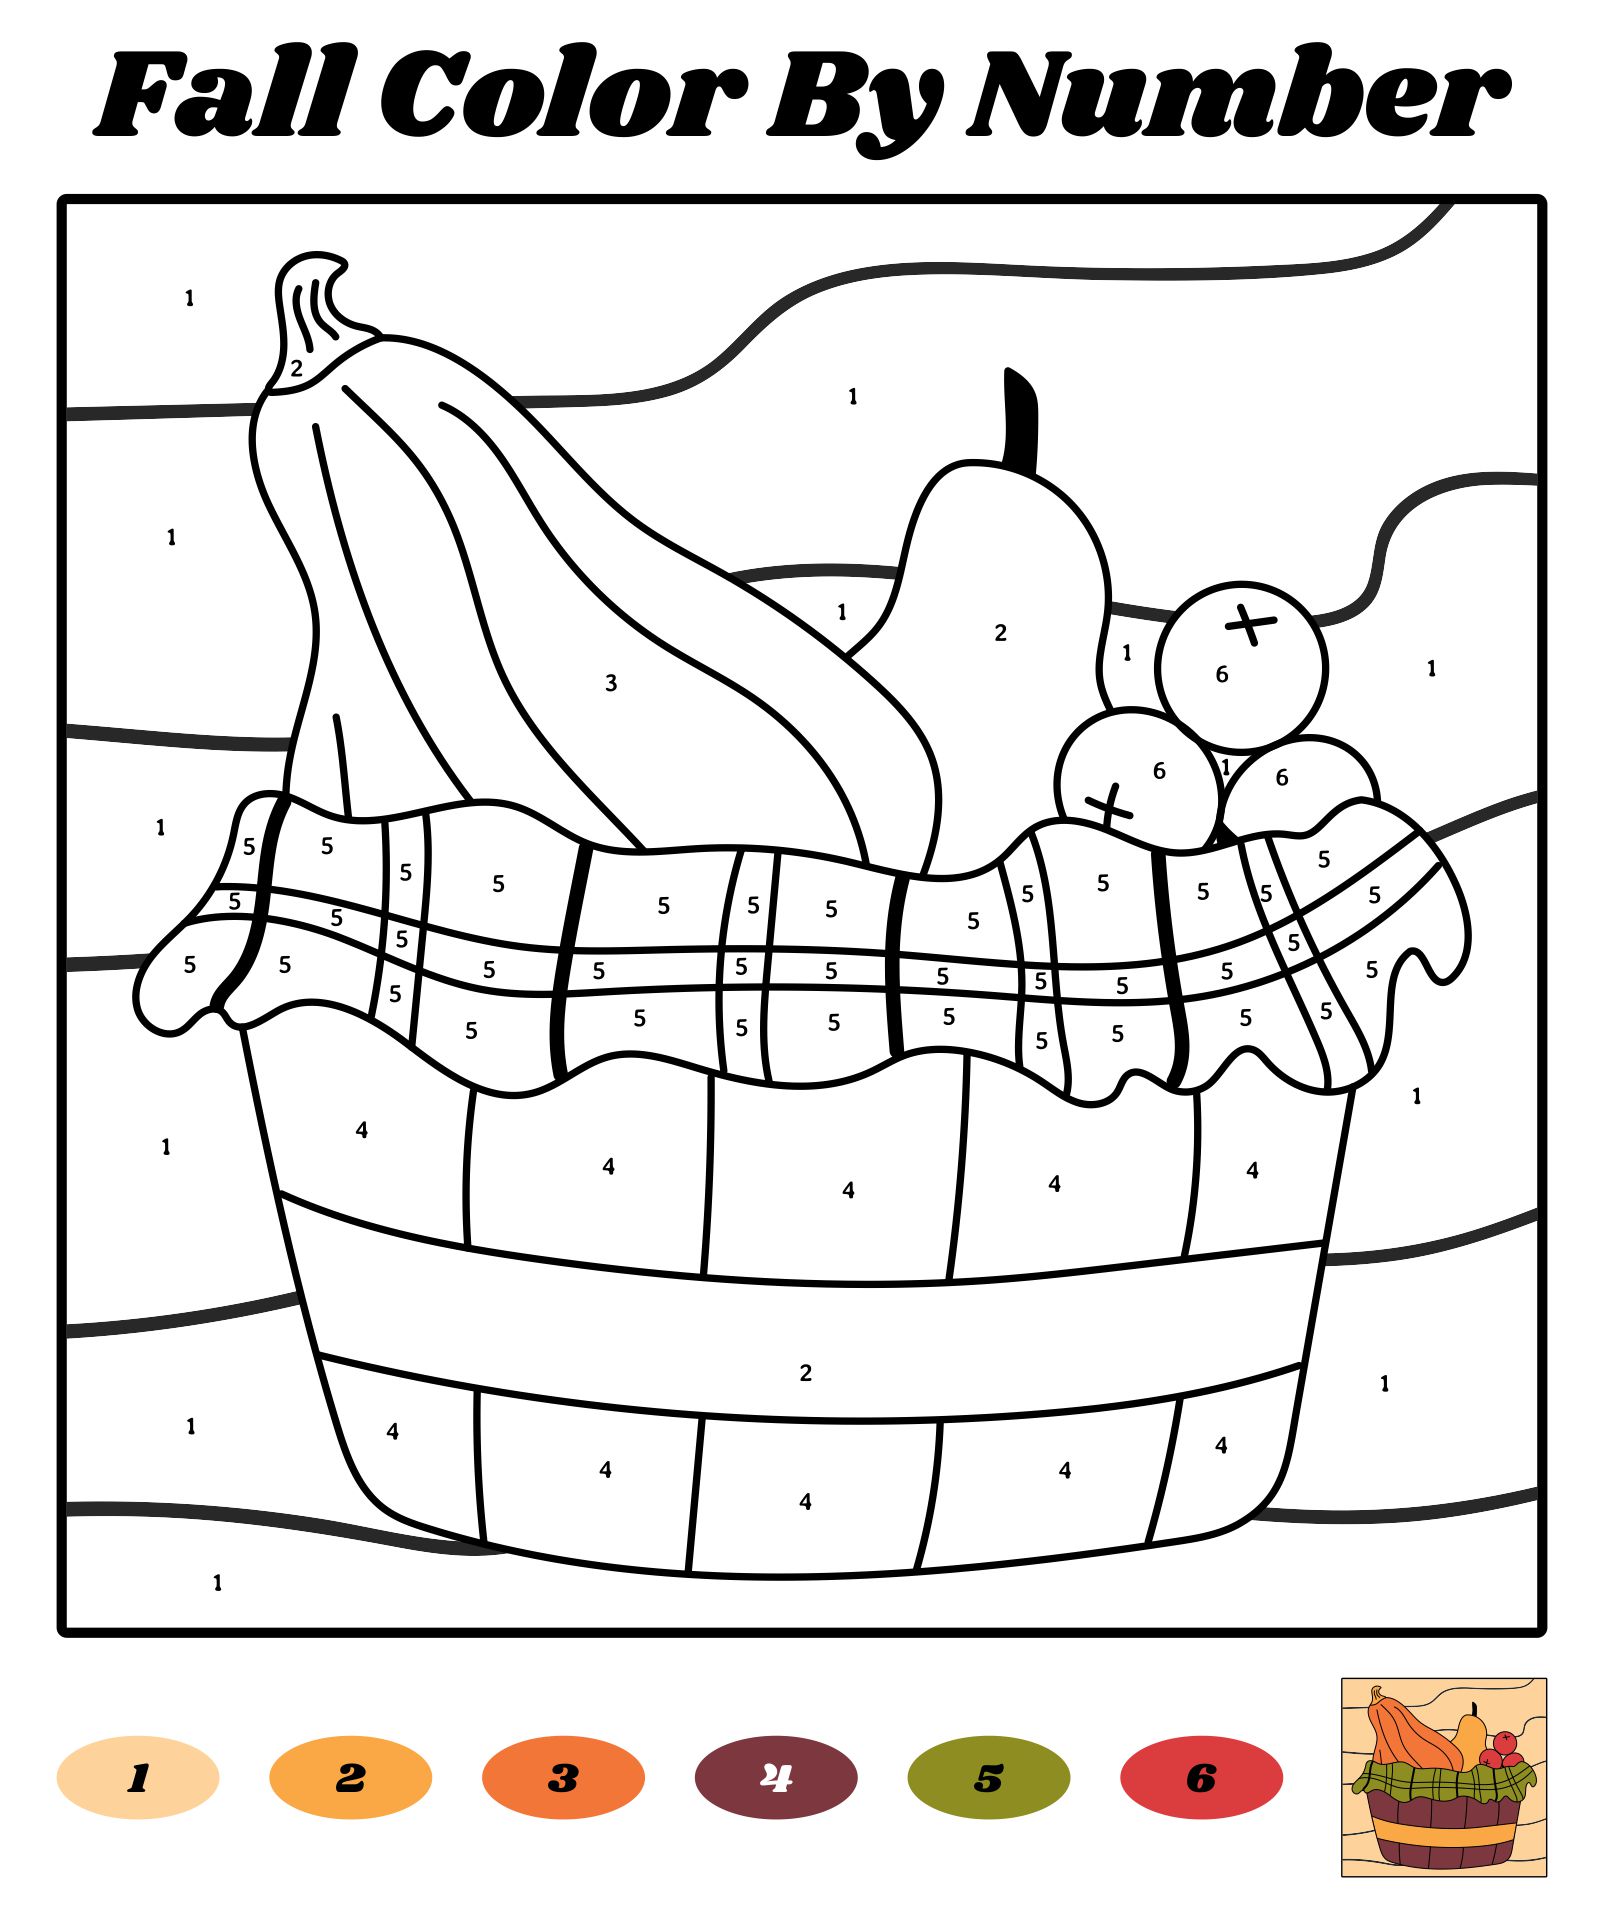 Fall Color By Number Printables For Kids